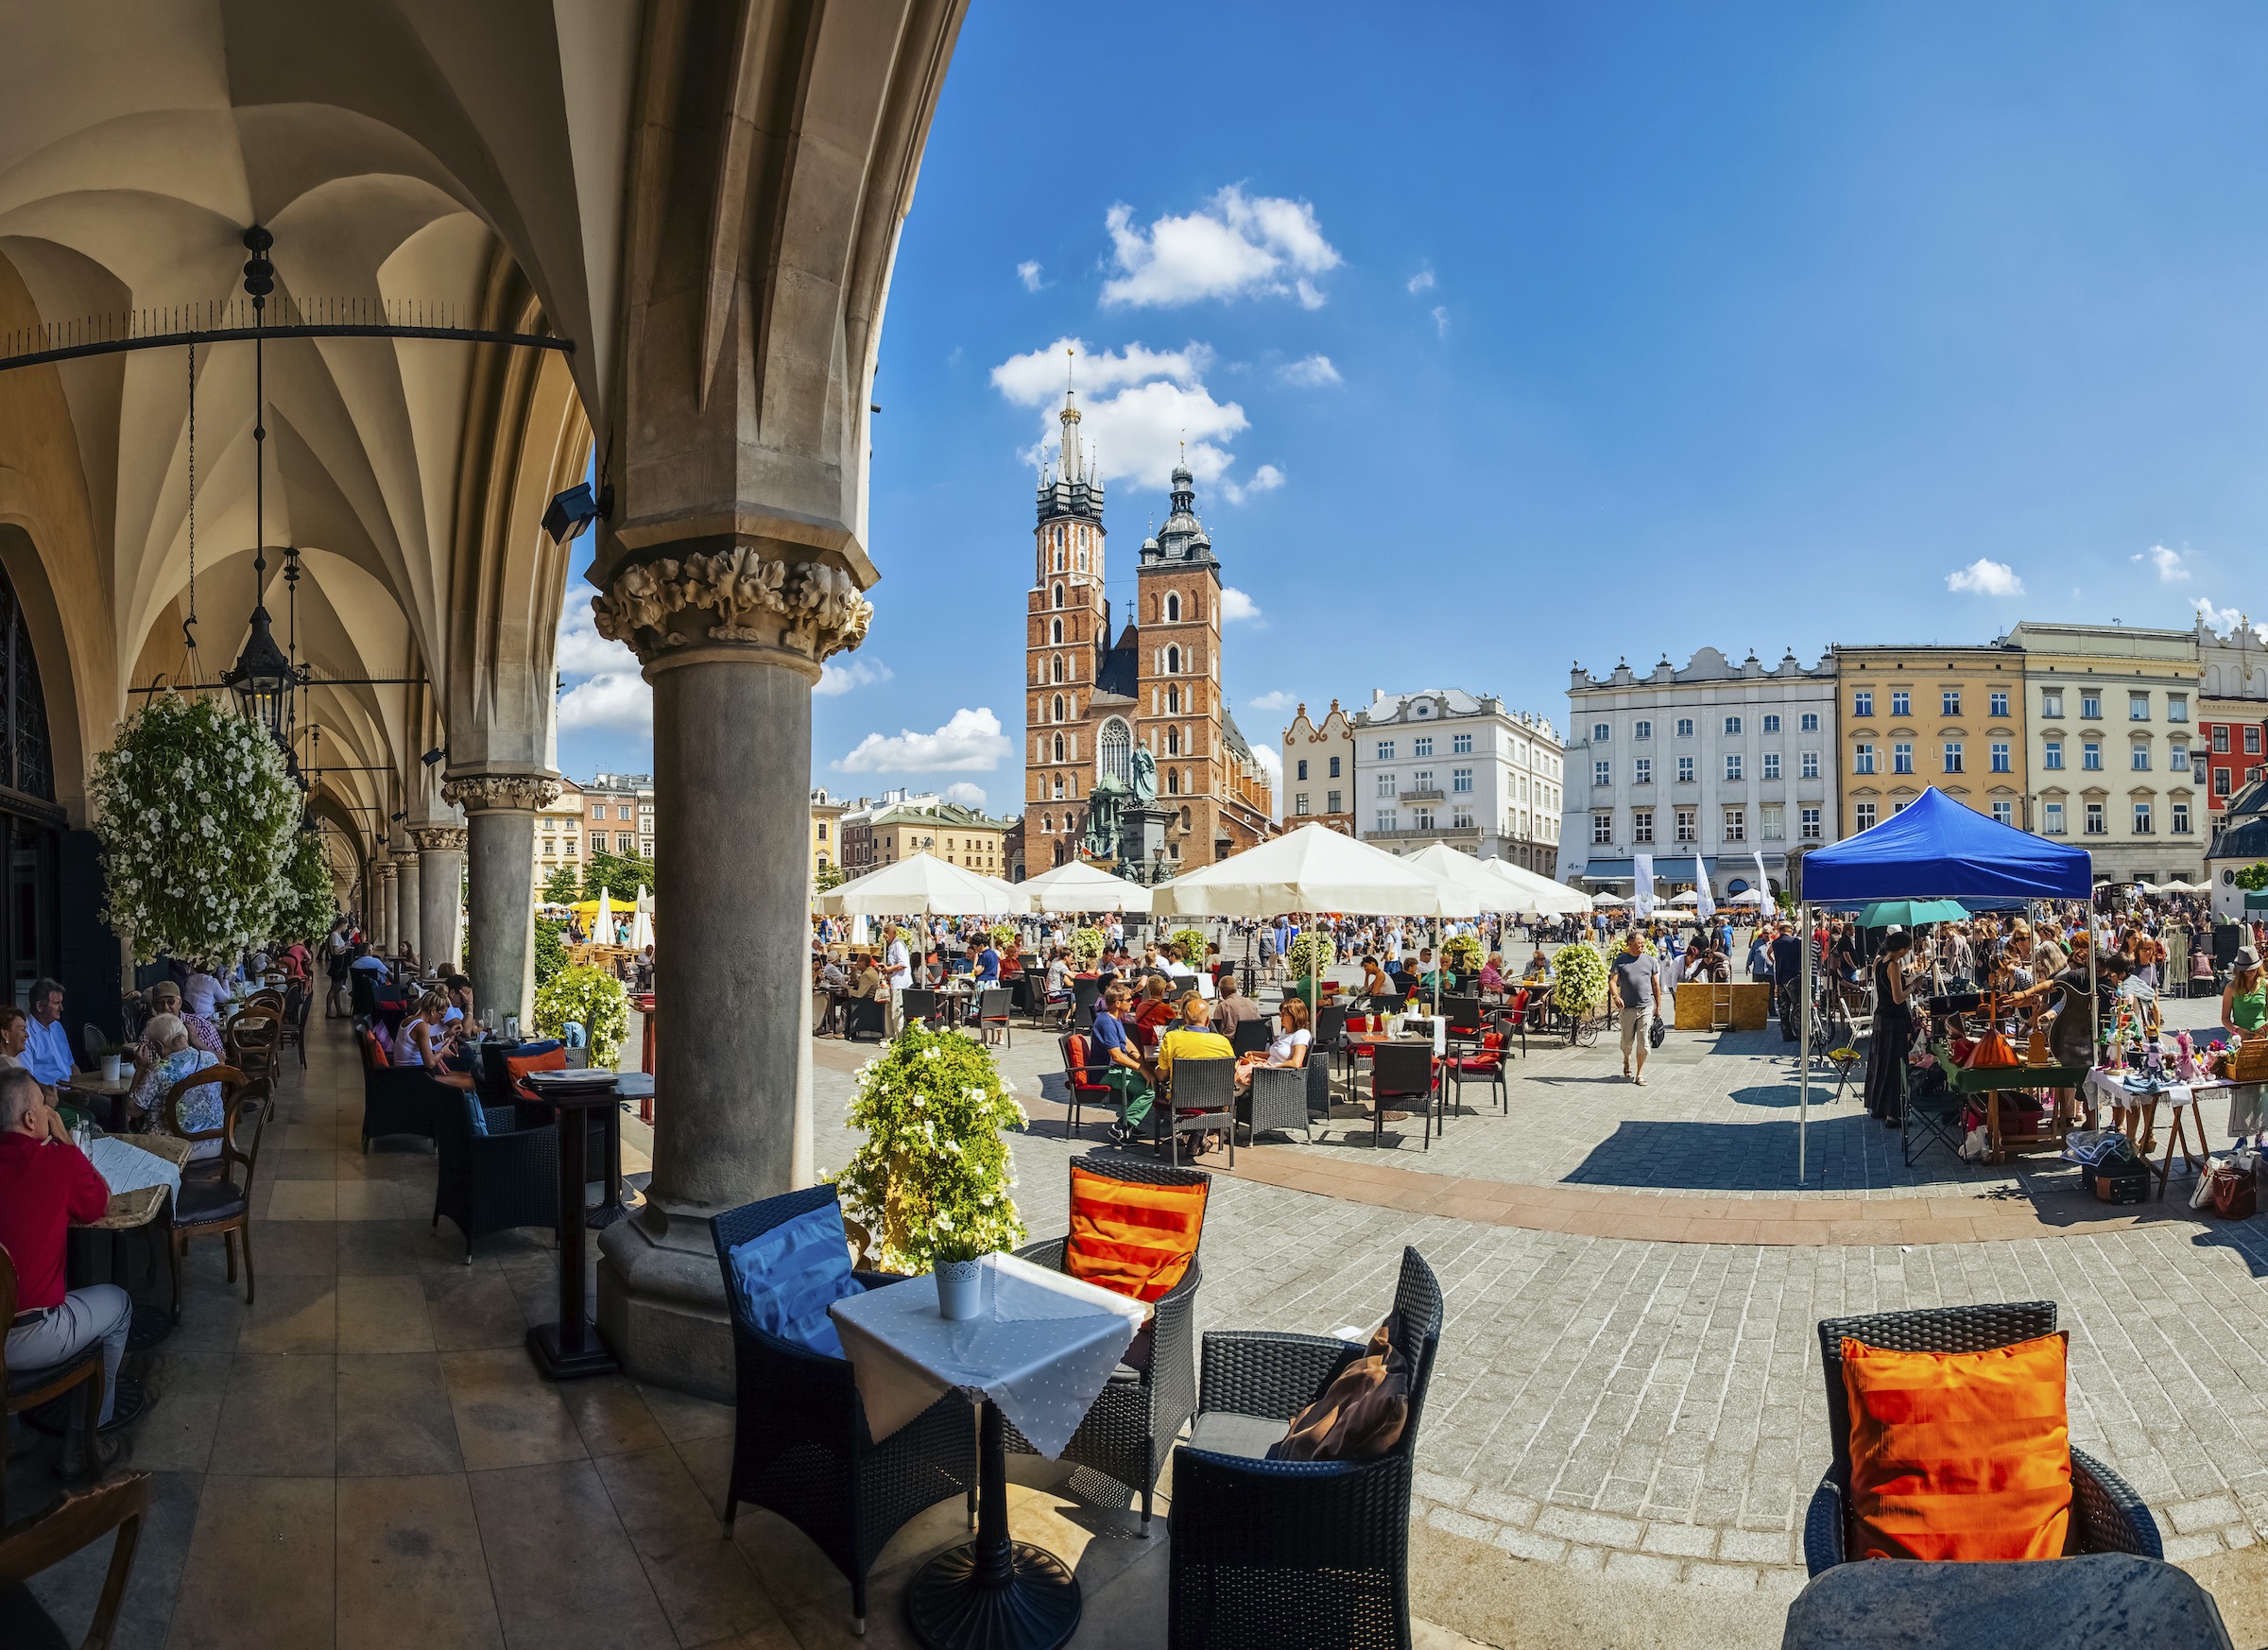 Luxury Central Europe Travel